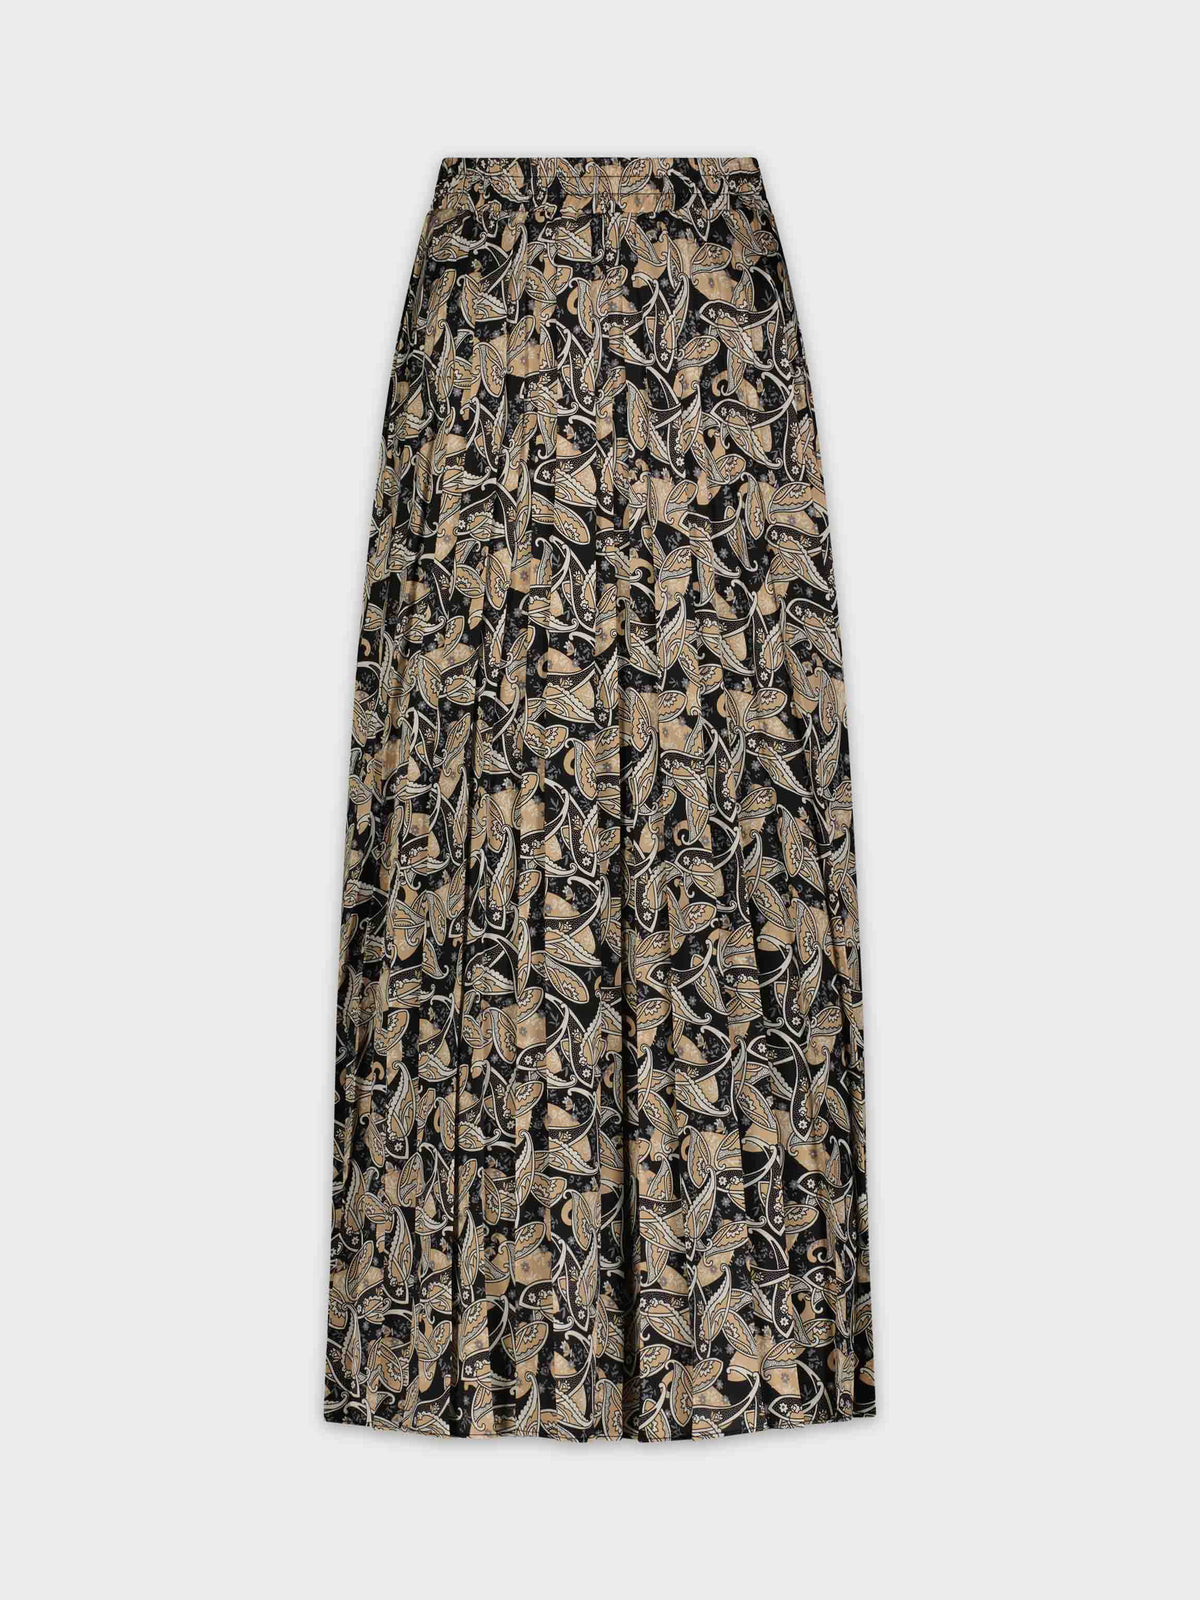 COVERED BAND PLEATED SKIRT 35"-GOLD LEAF